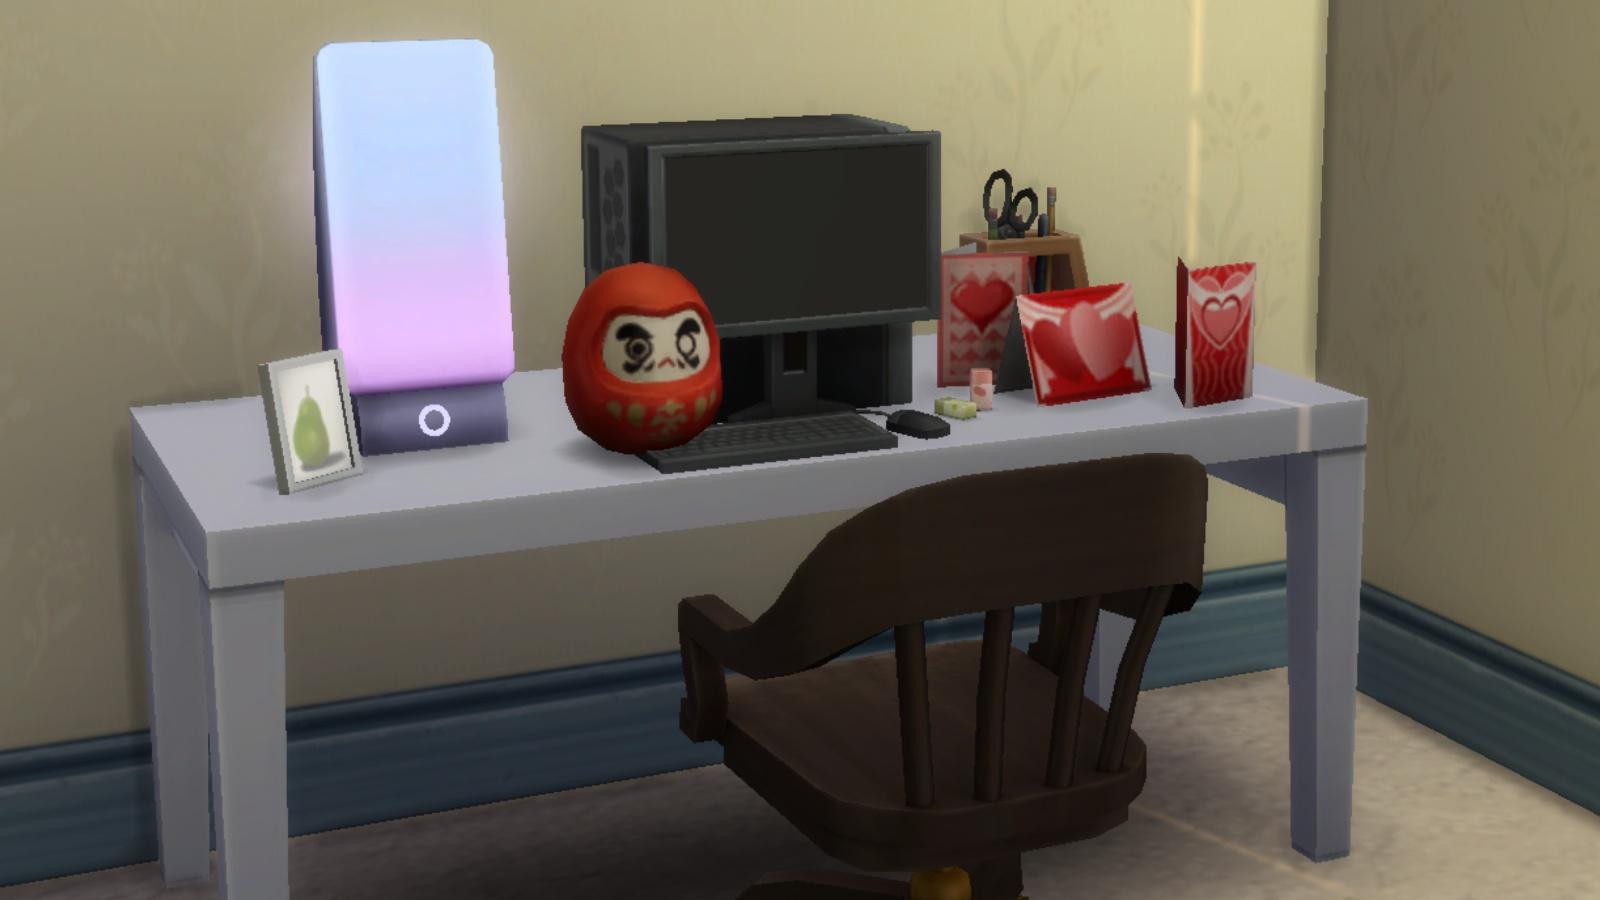 A screenshot featuring a cluttered desk in The Sims 4.